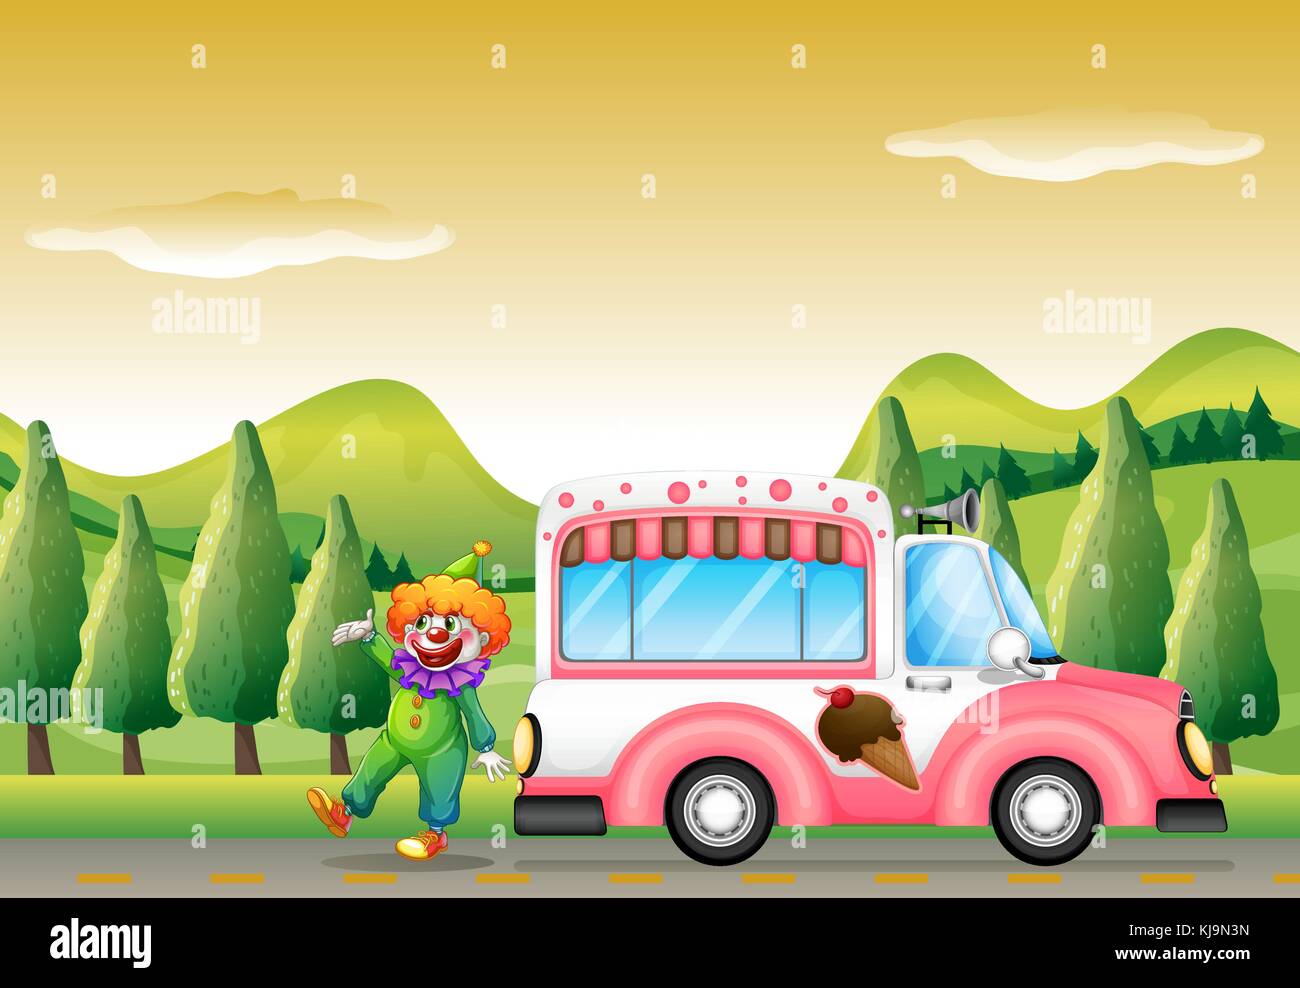 Illustration of the clown and the pink icecream bus Stock Vector